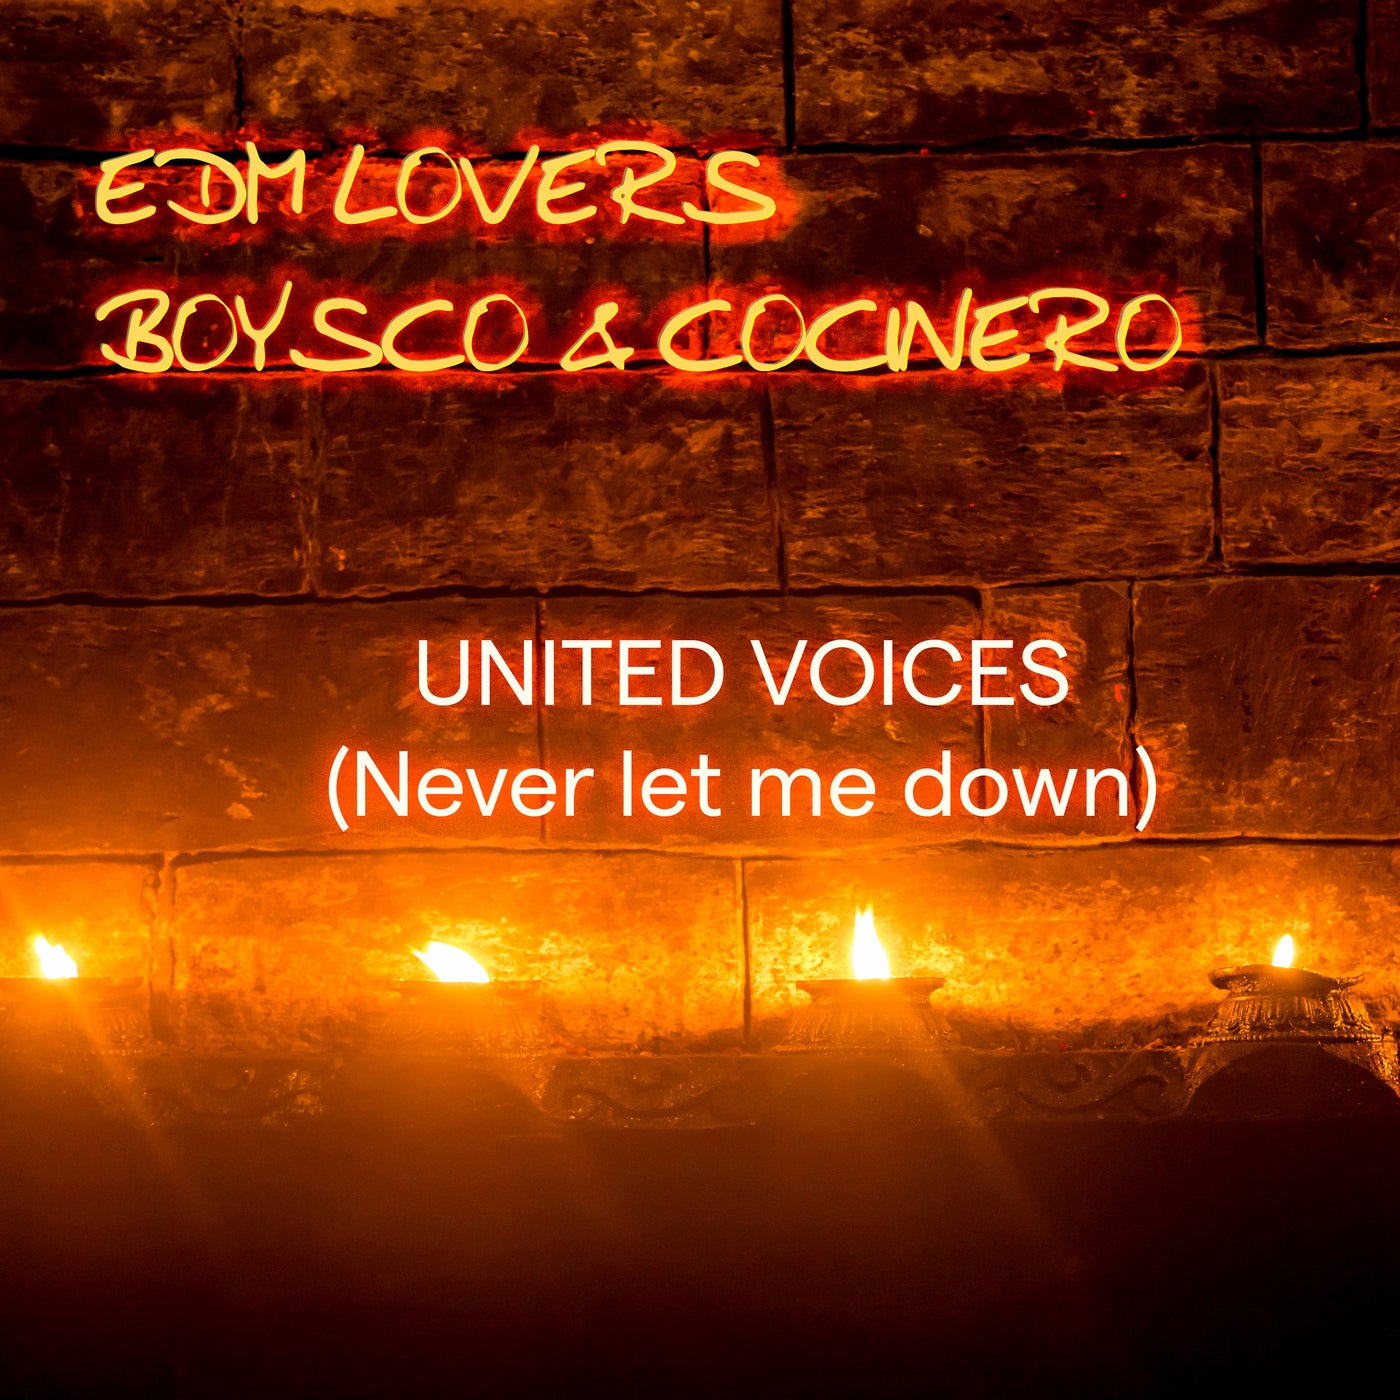 United Voices (Never let me down)